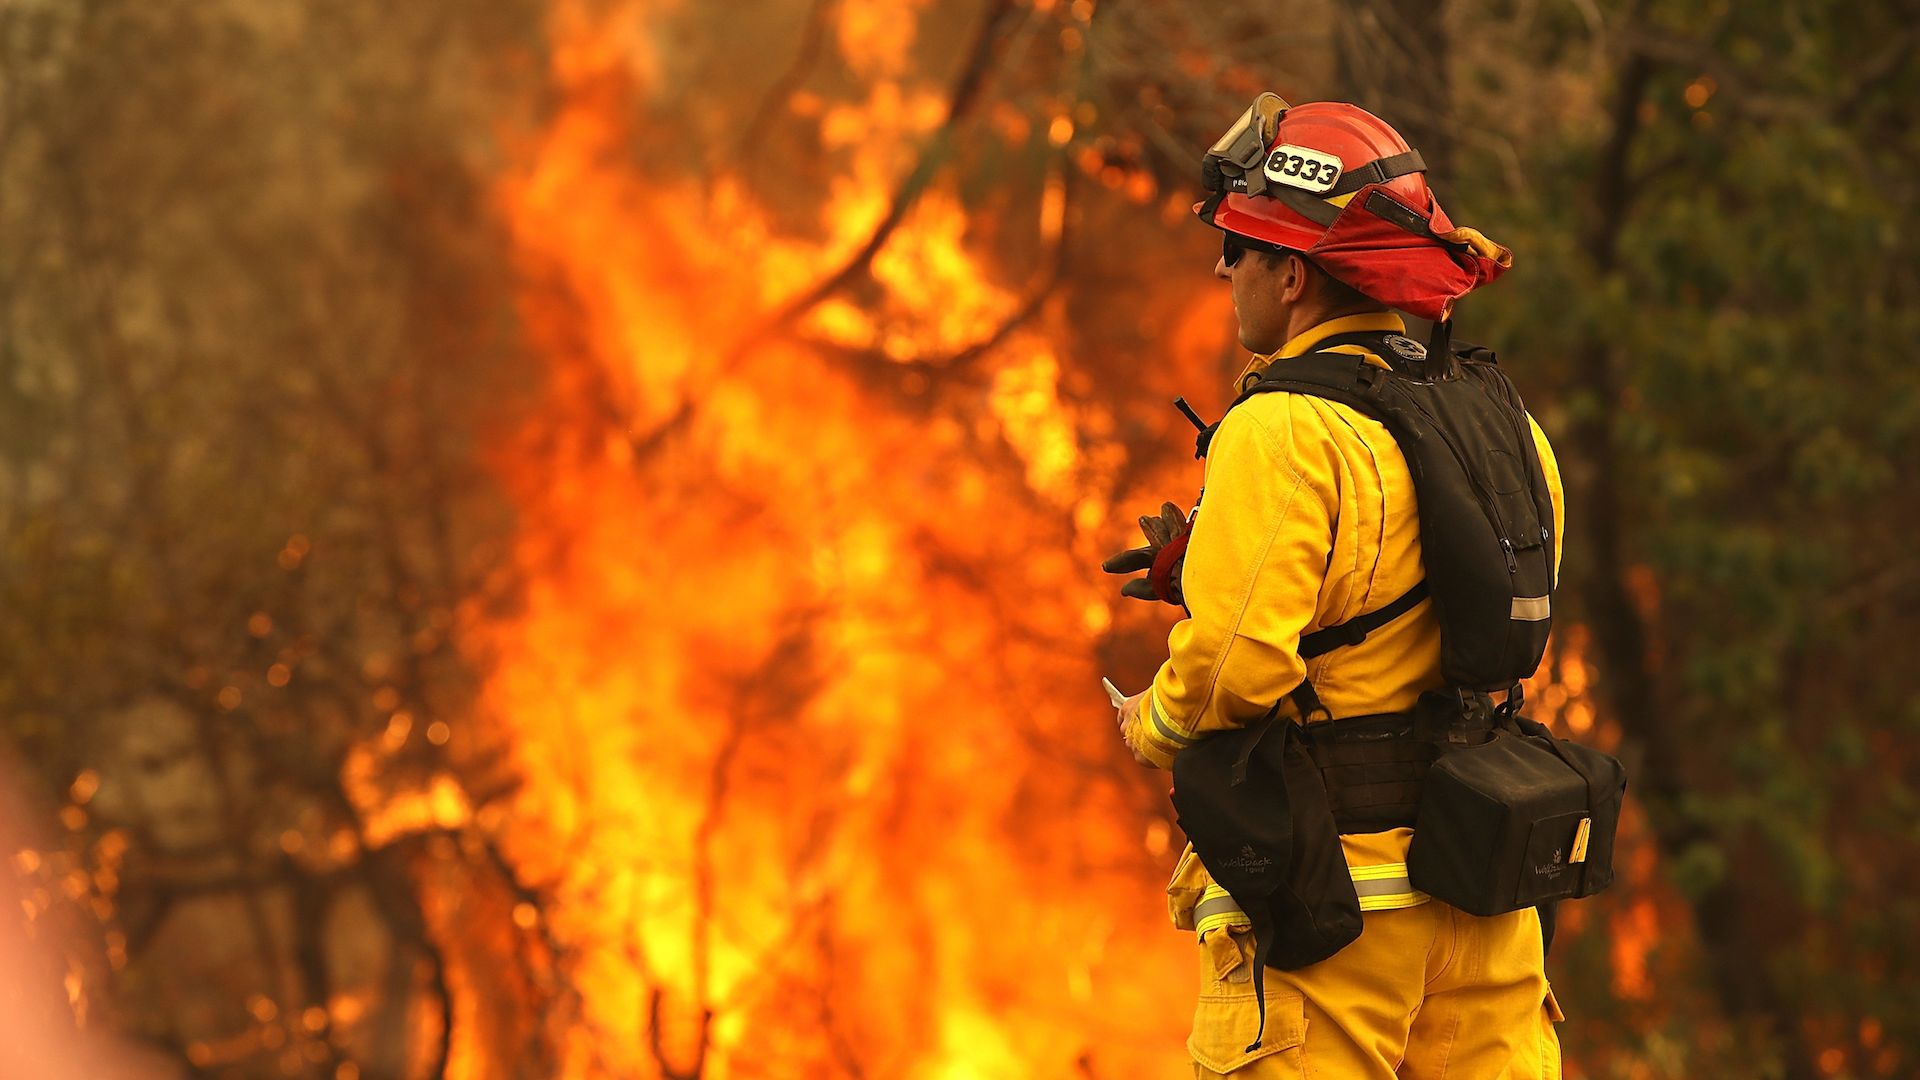 Firefighter battling the flames from the deadly Carr Fire in northern California.